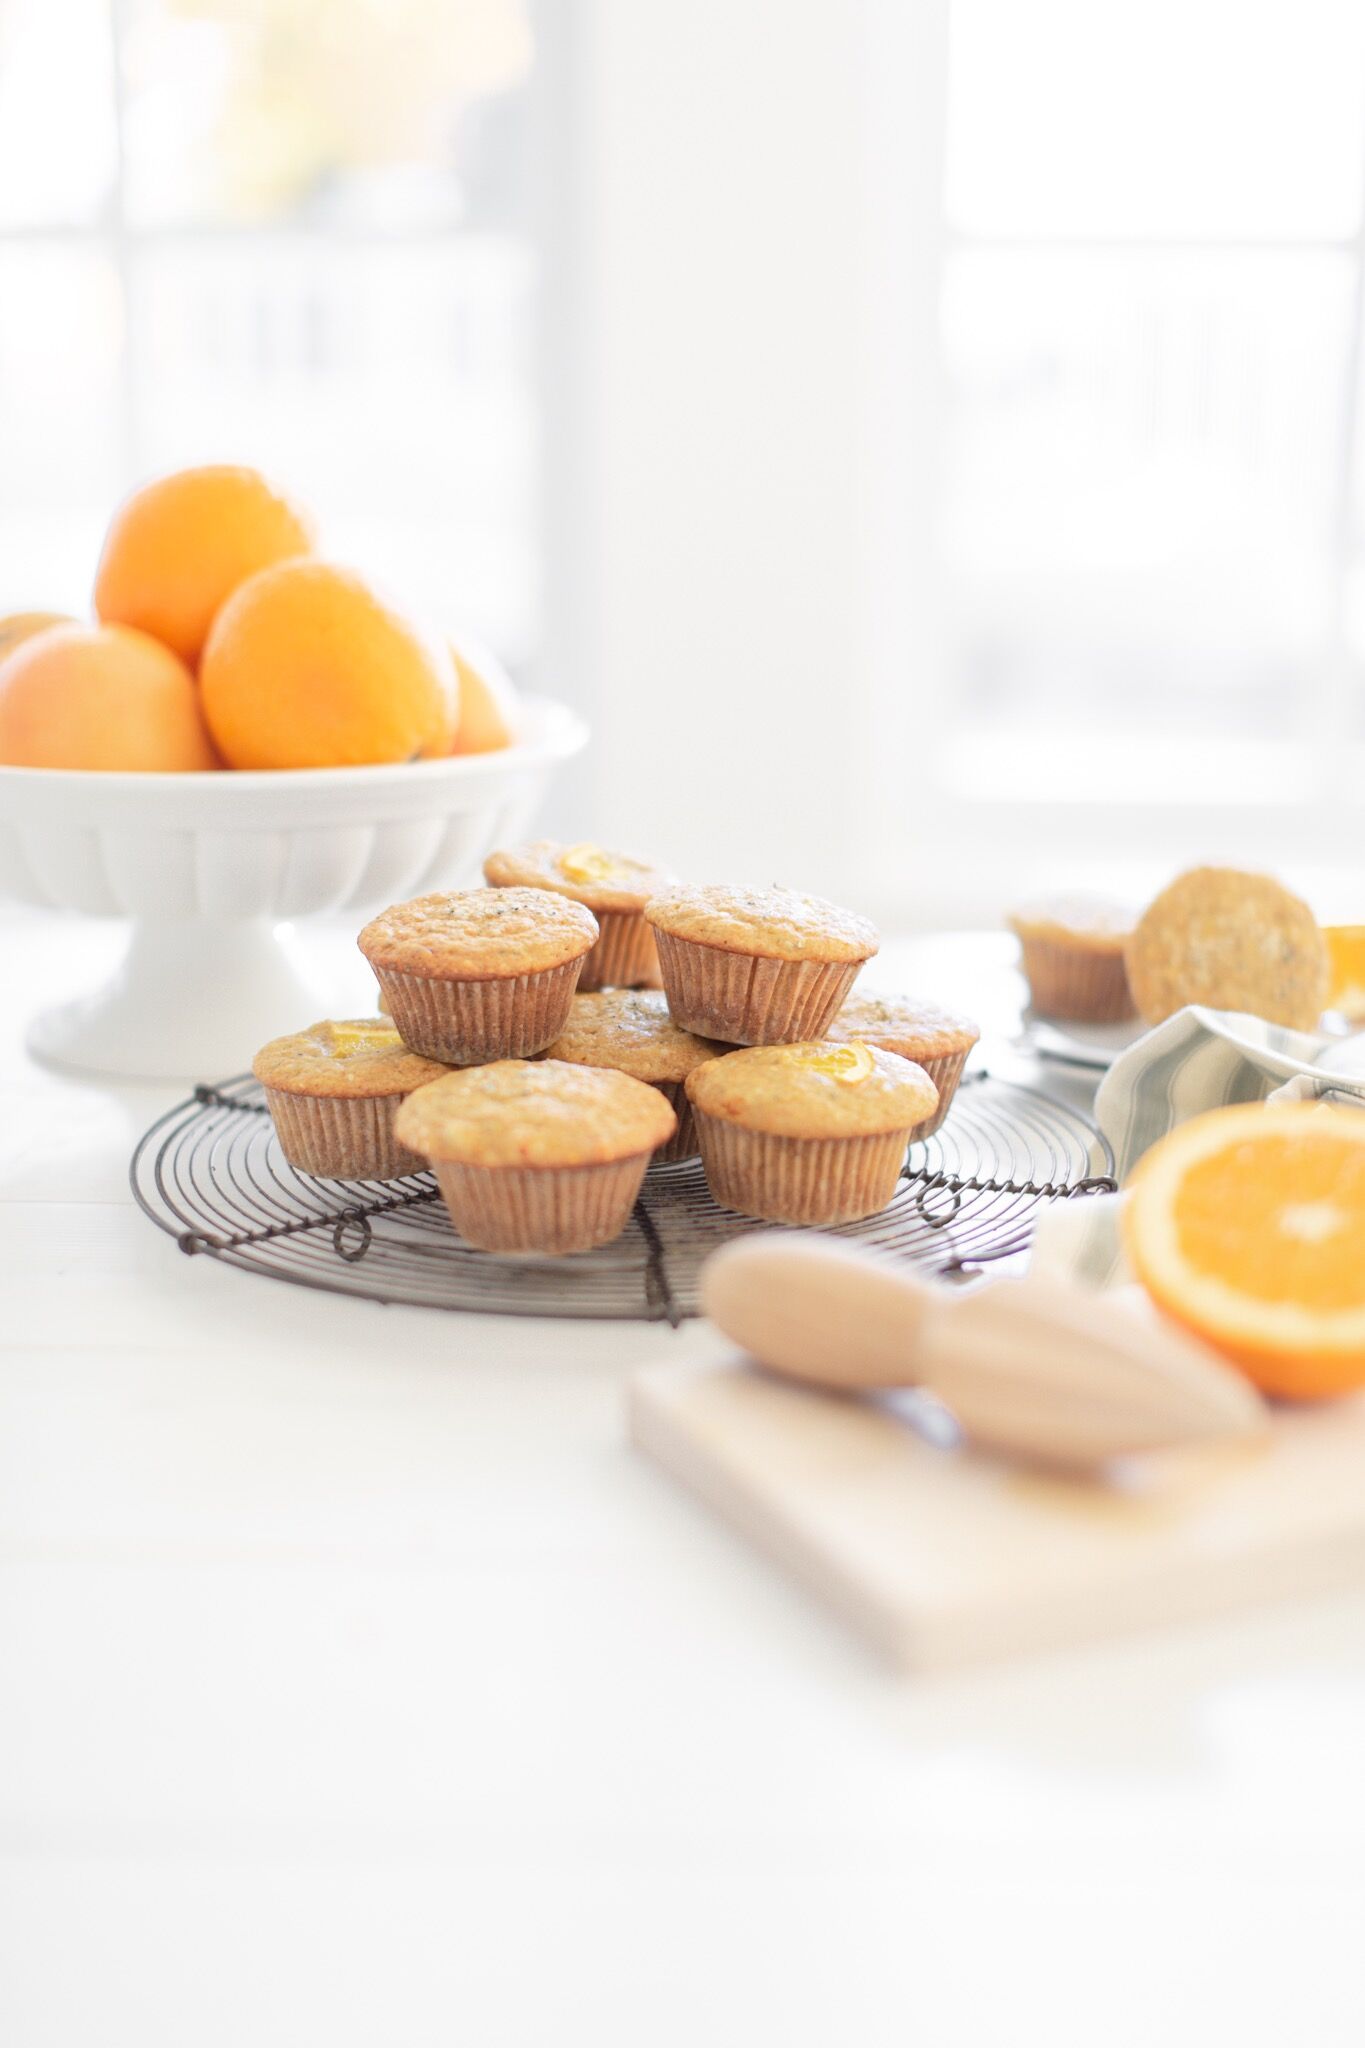 Orange Hemp Heart Muffins - healthy, naturally sweetened and school lunch friendly!